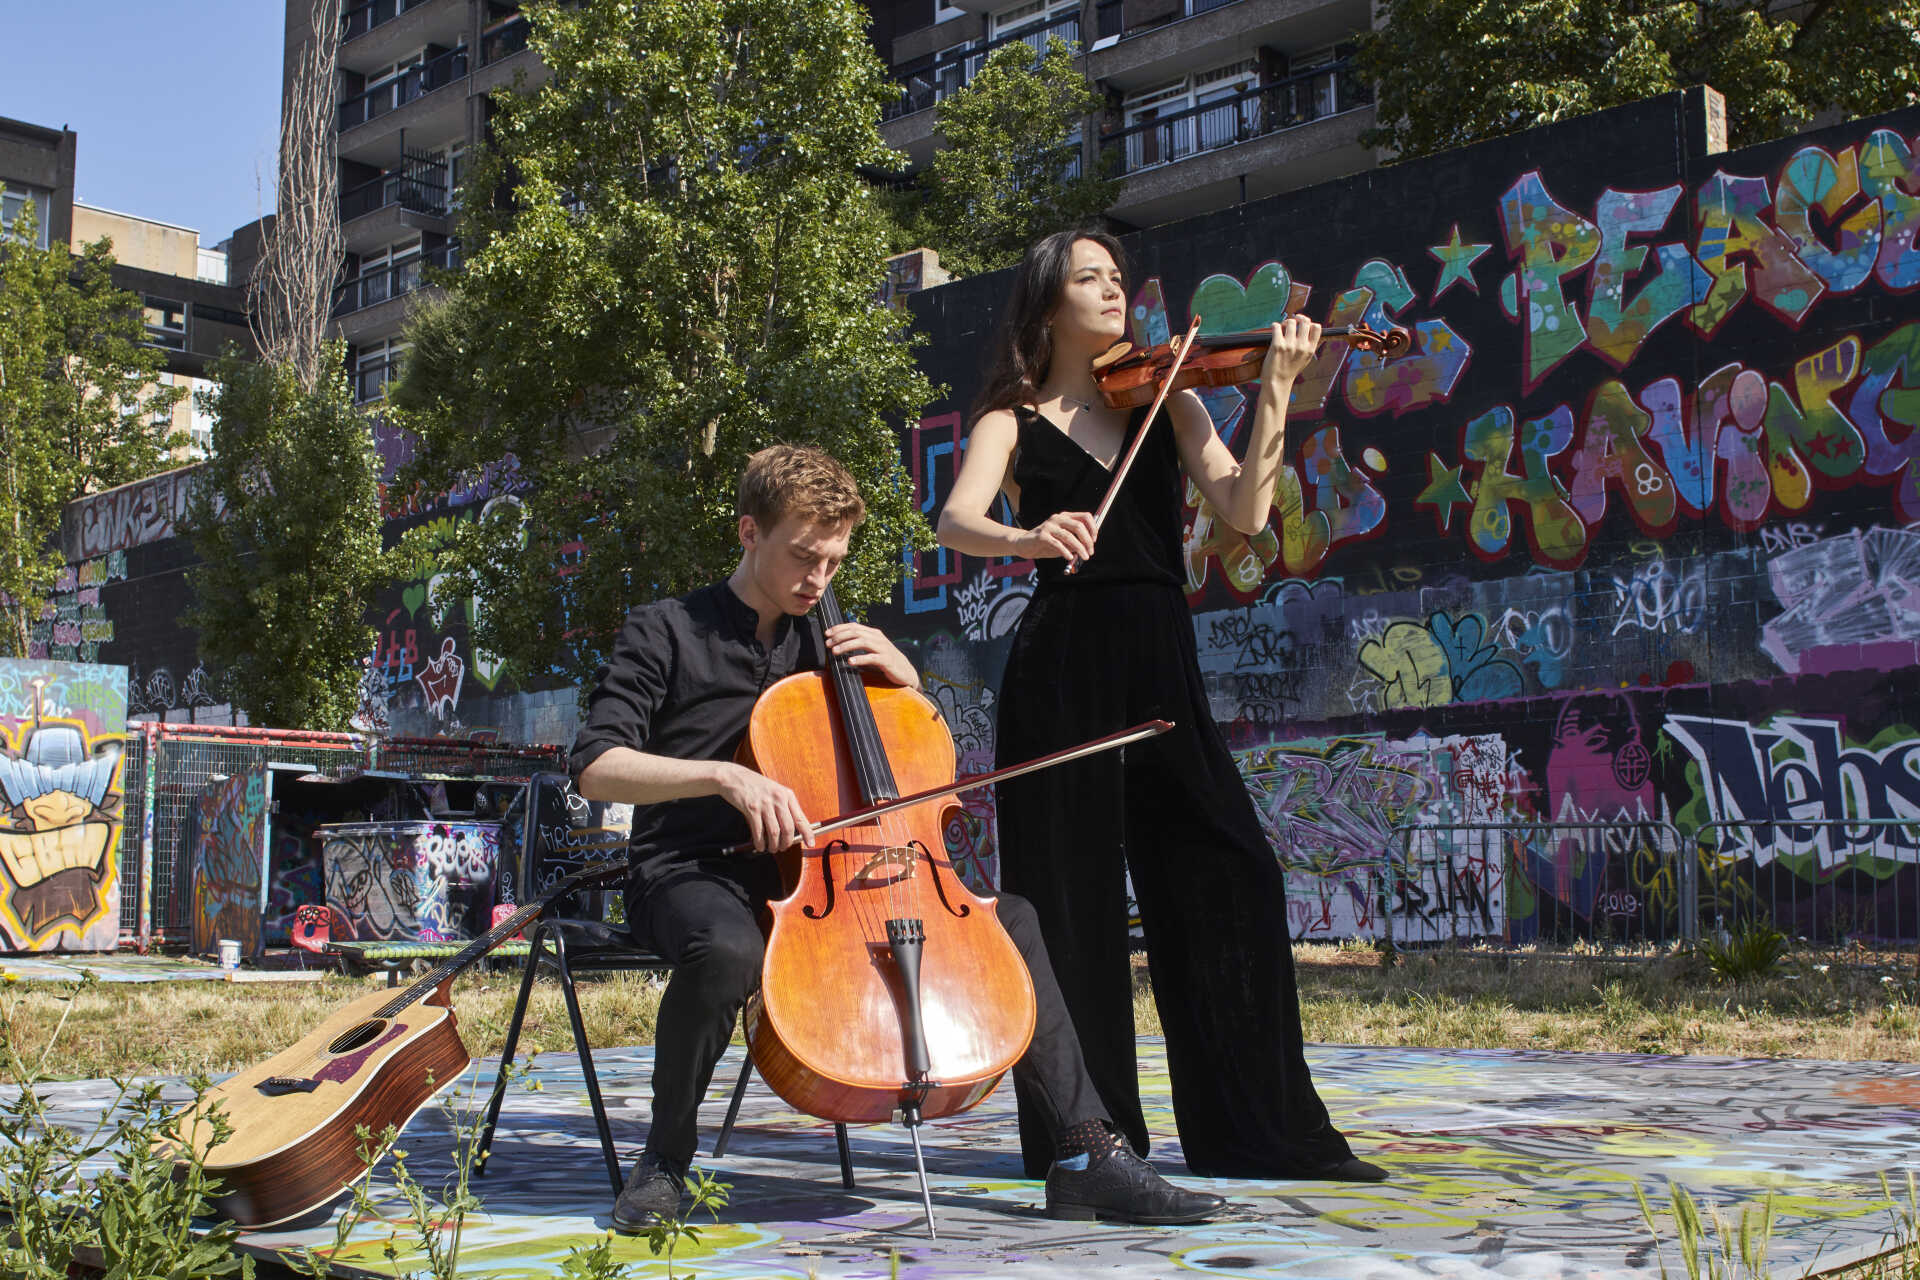 Seated cellist and standing violinist against an urban background of a graffiti-strewn wall